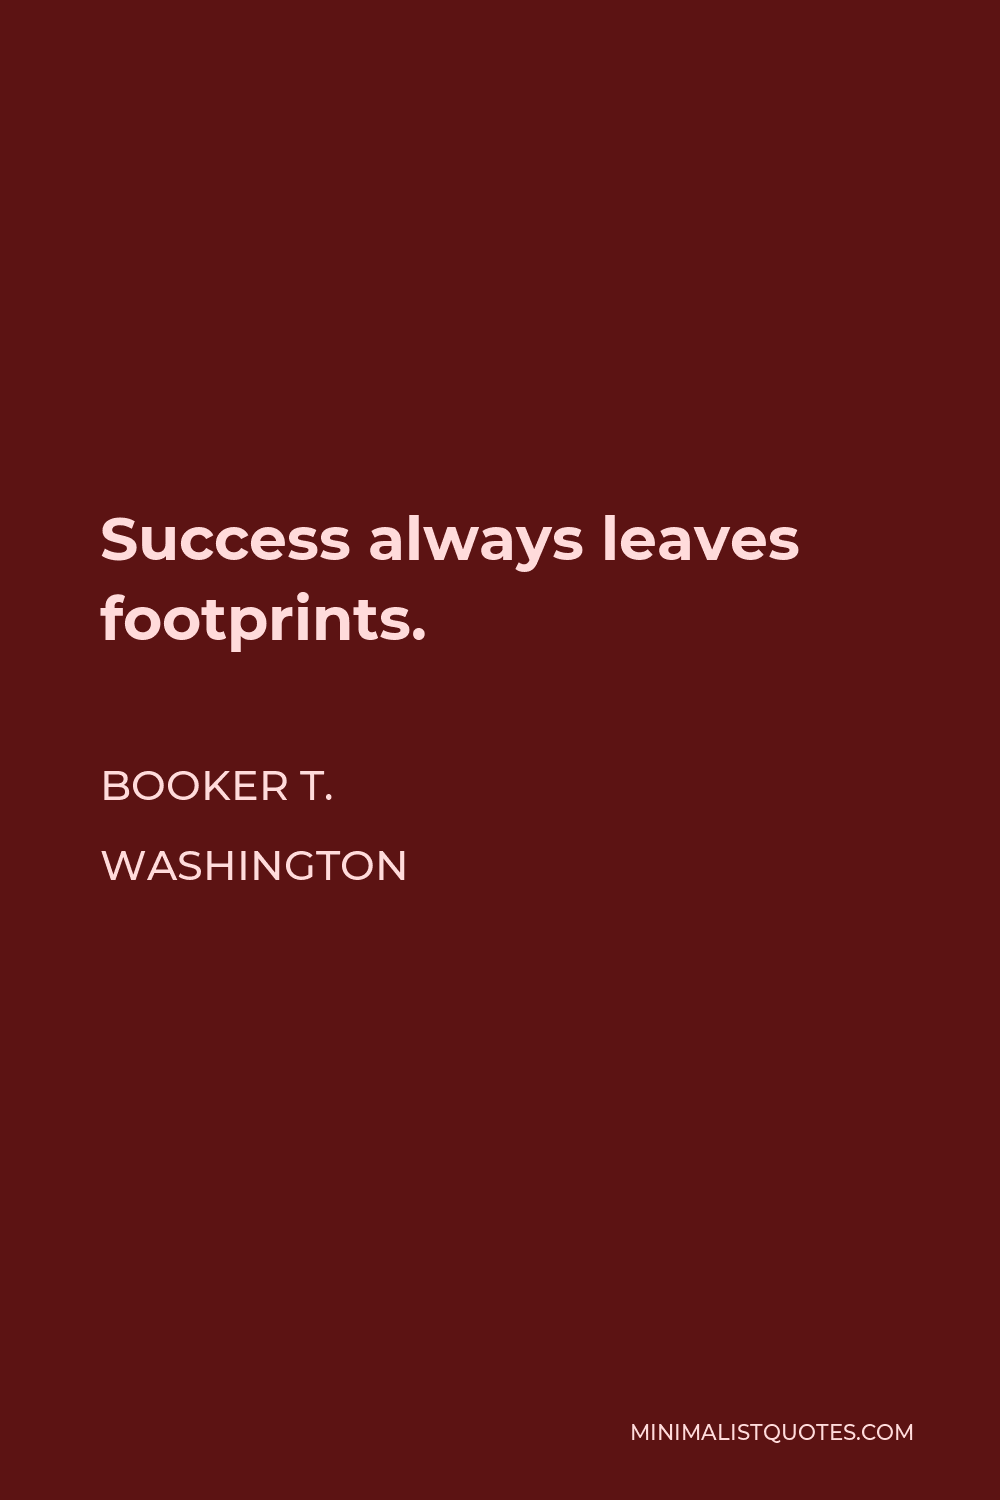 Booker T. Washington Quote - Success always leaves footprints.